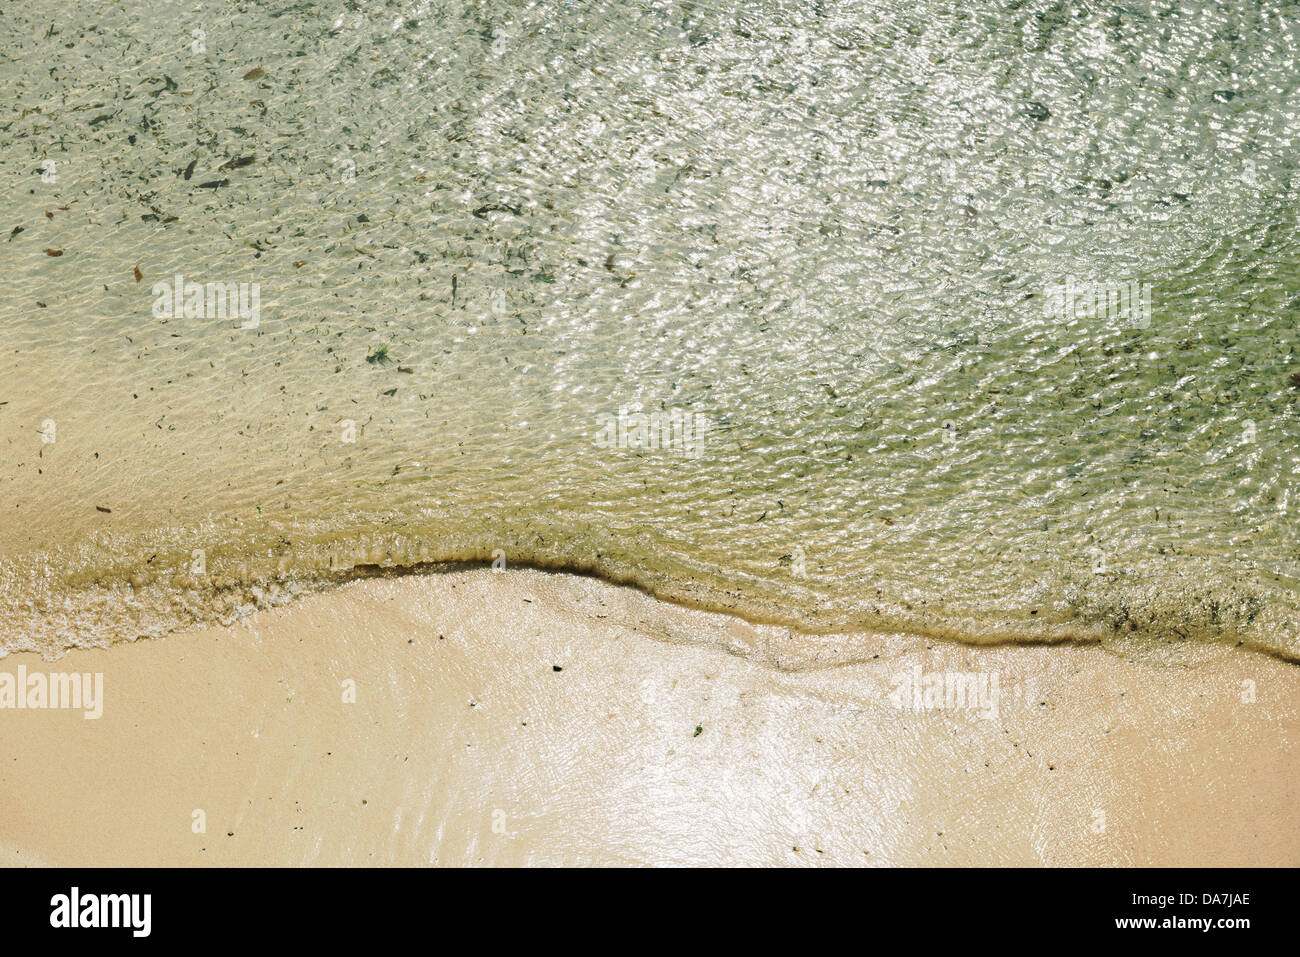 Waves from above lapping against the shore at St. Ives, Cornwall, Southwest England on a bright June day. Stock Photo